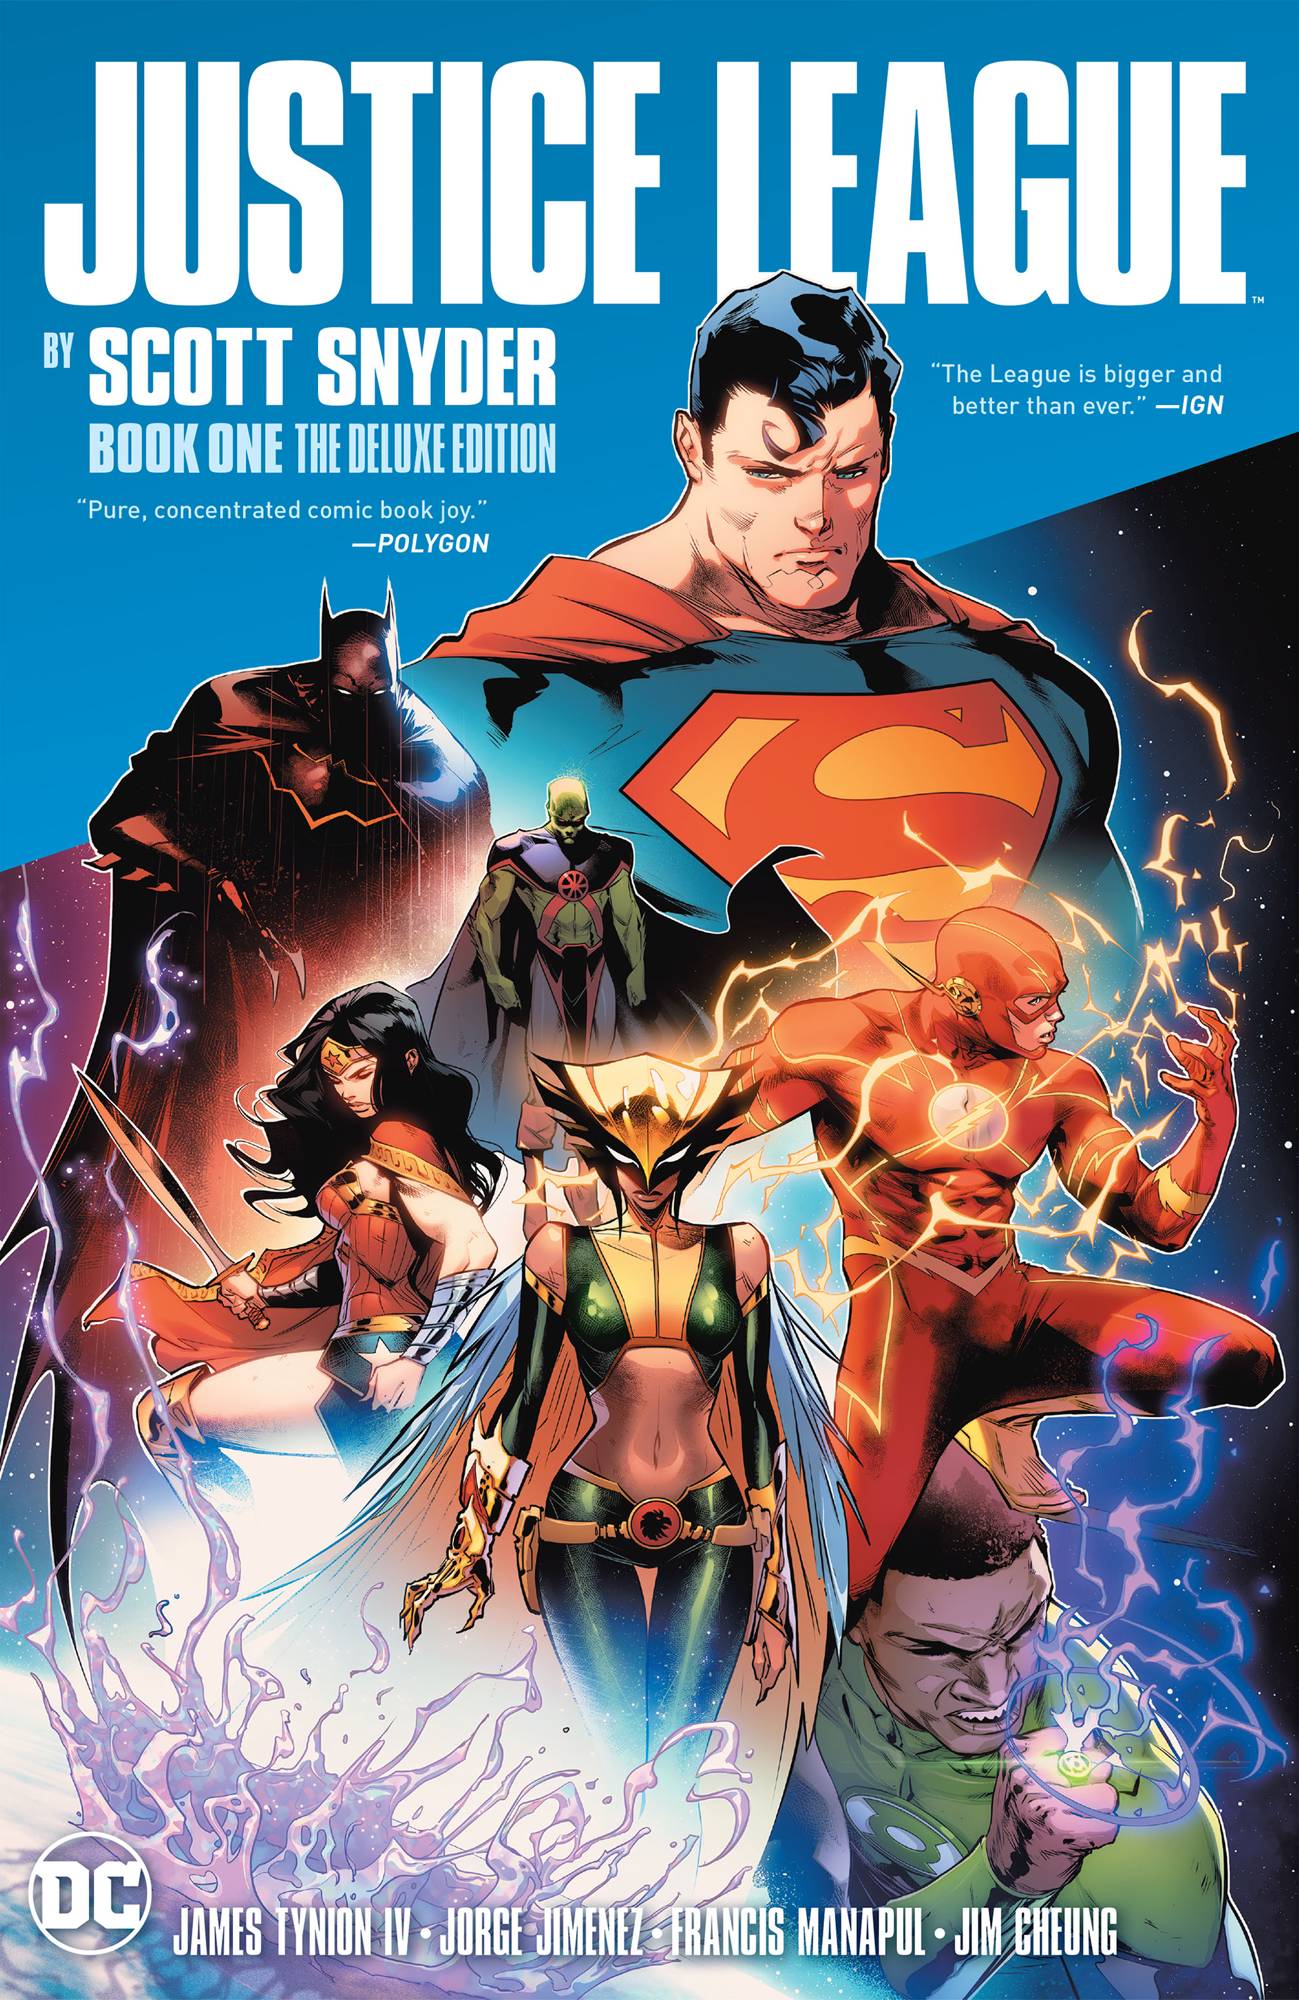 buy-justice-league-by-scott-snyder-deluxe-edition-hardcover-book-1